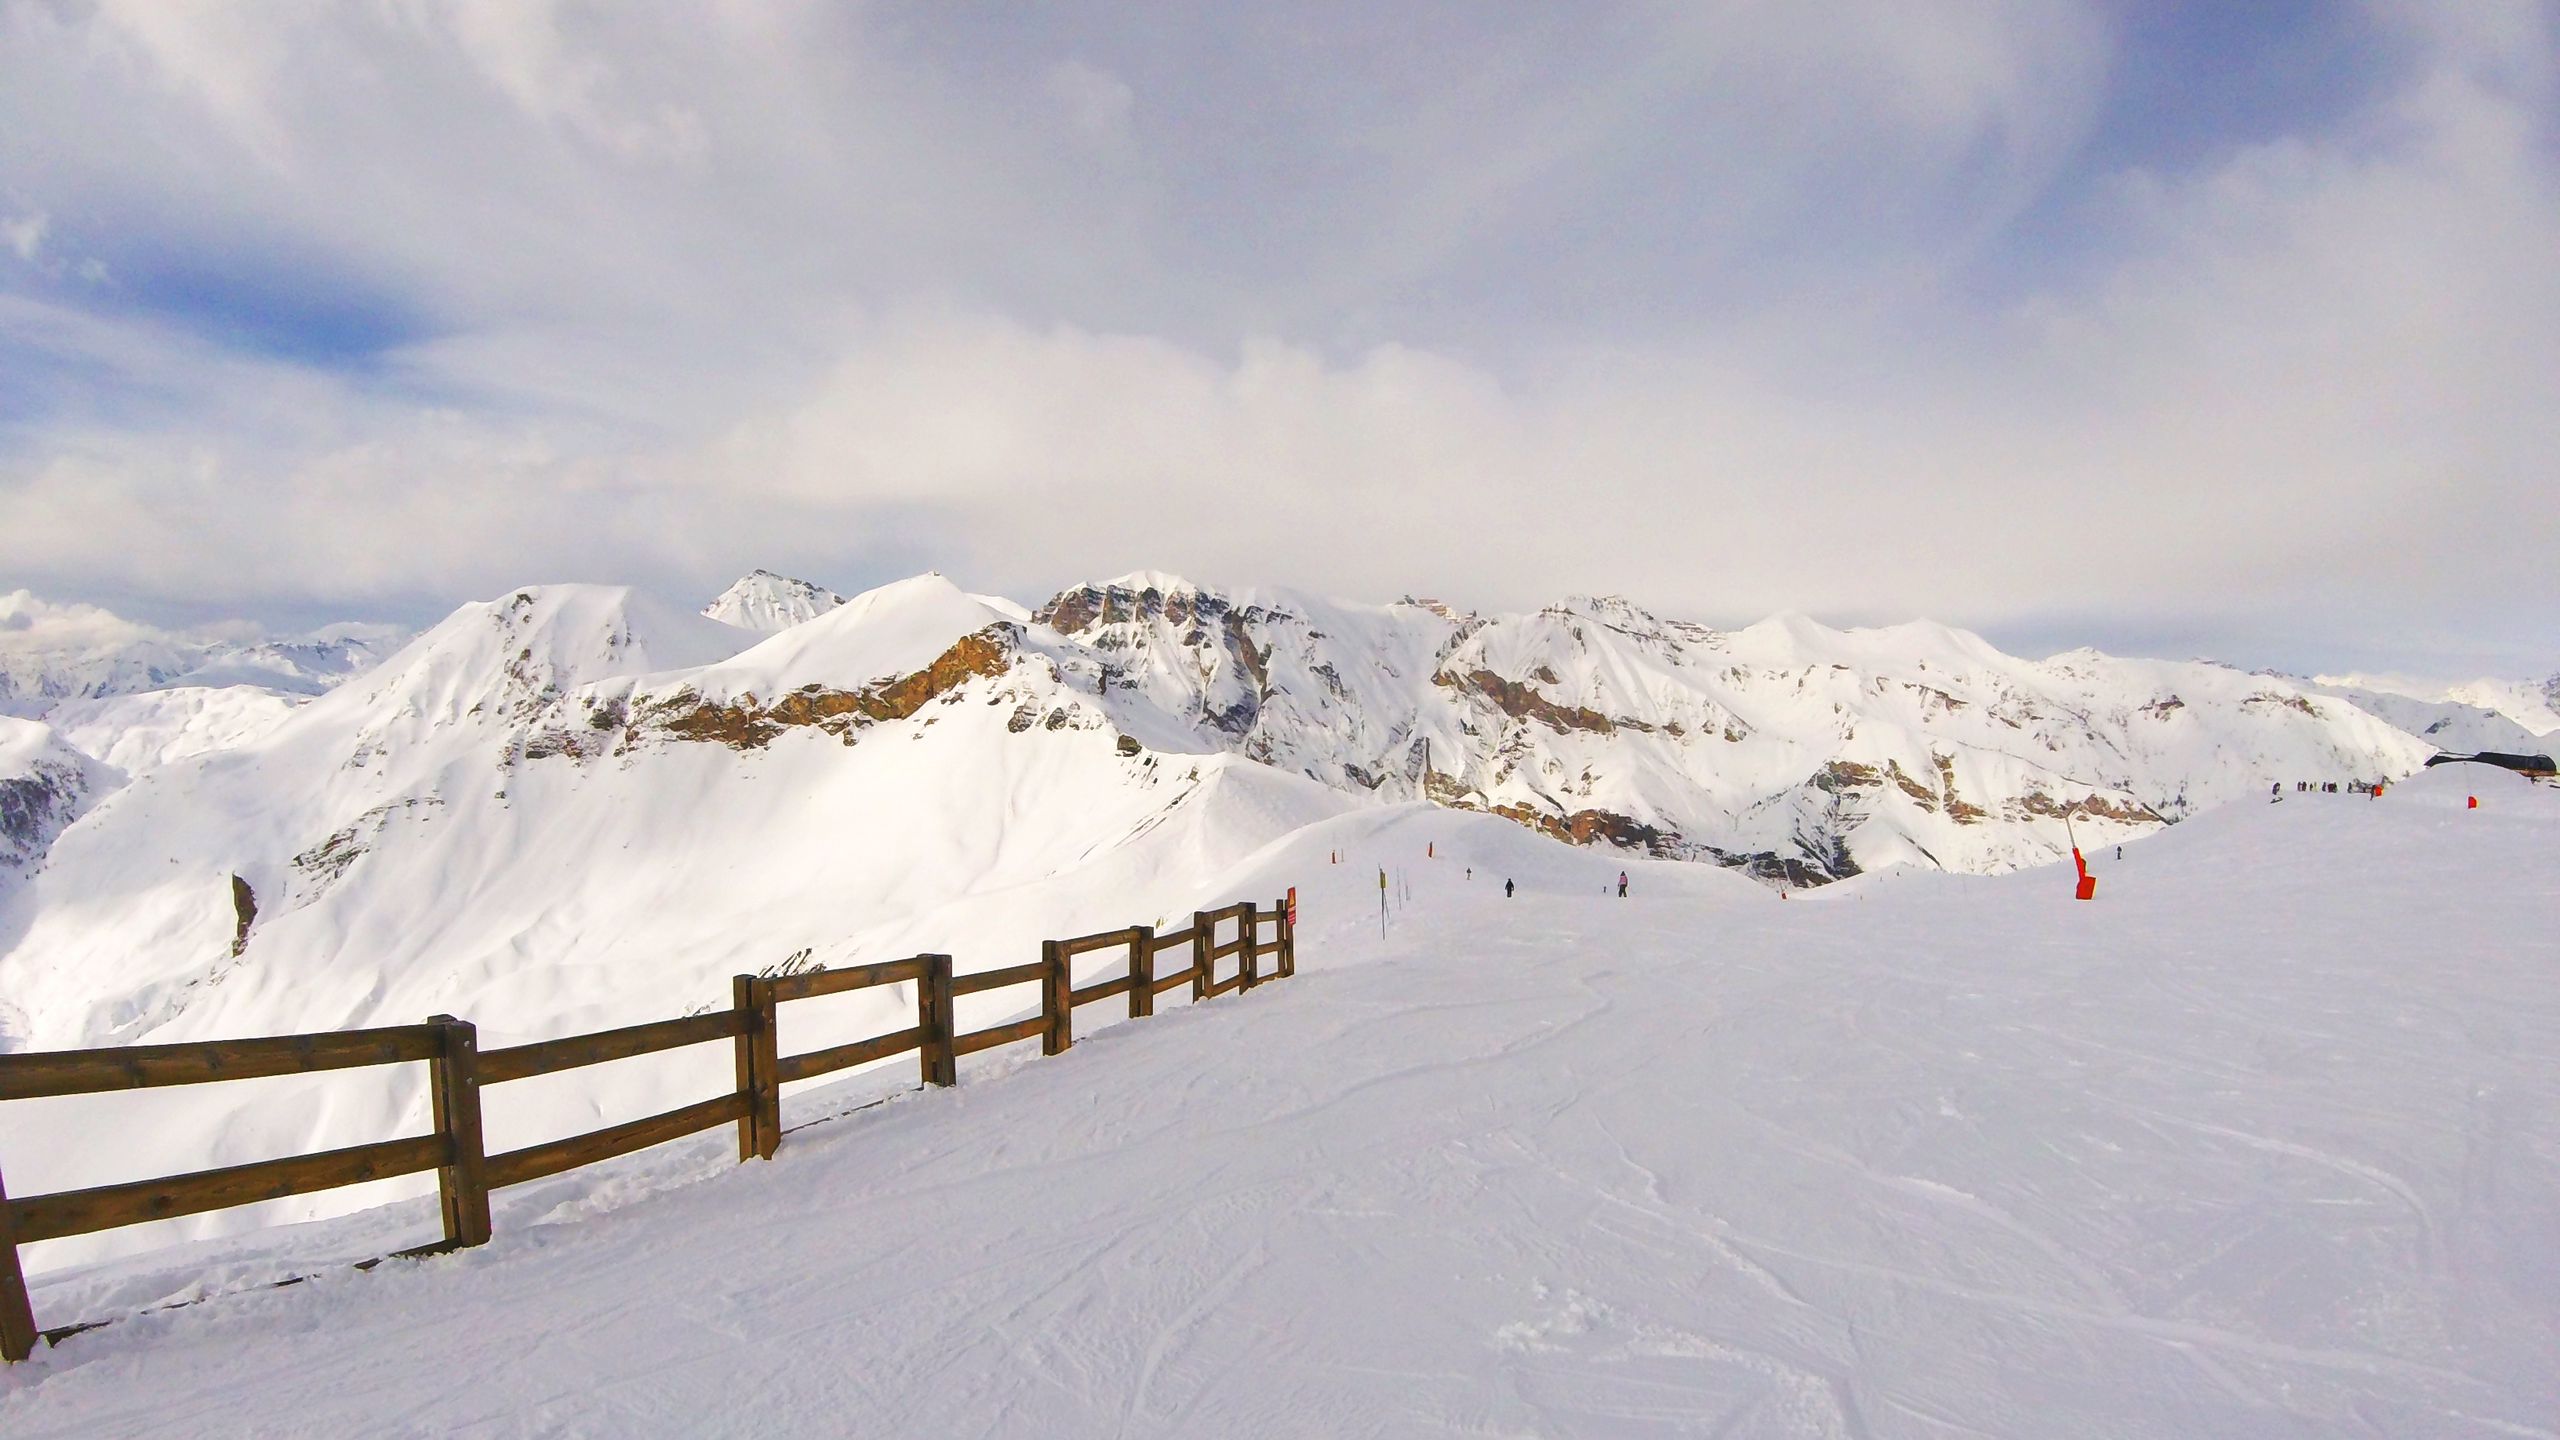 Download wallpaper 2560x1440 snow, mountains, summit, winter widescreen 16:9 HD background